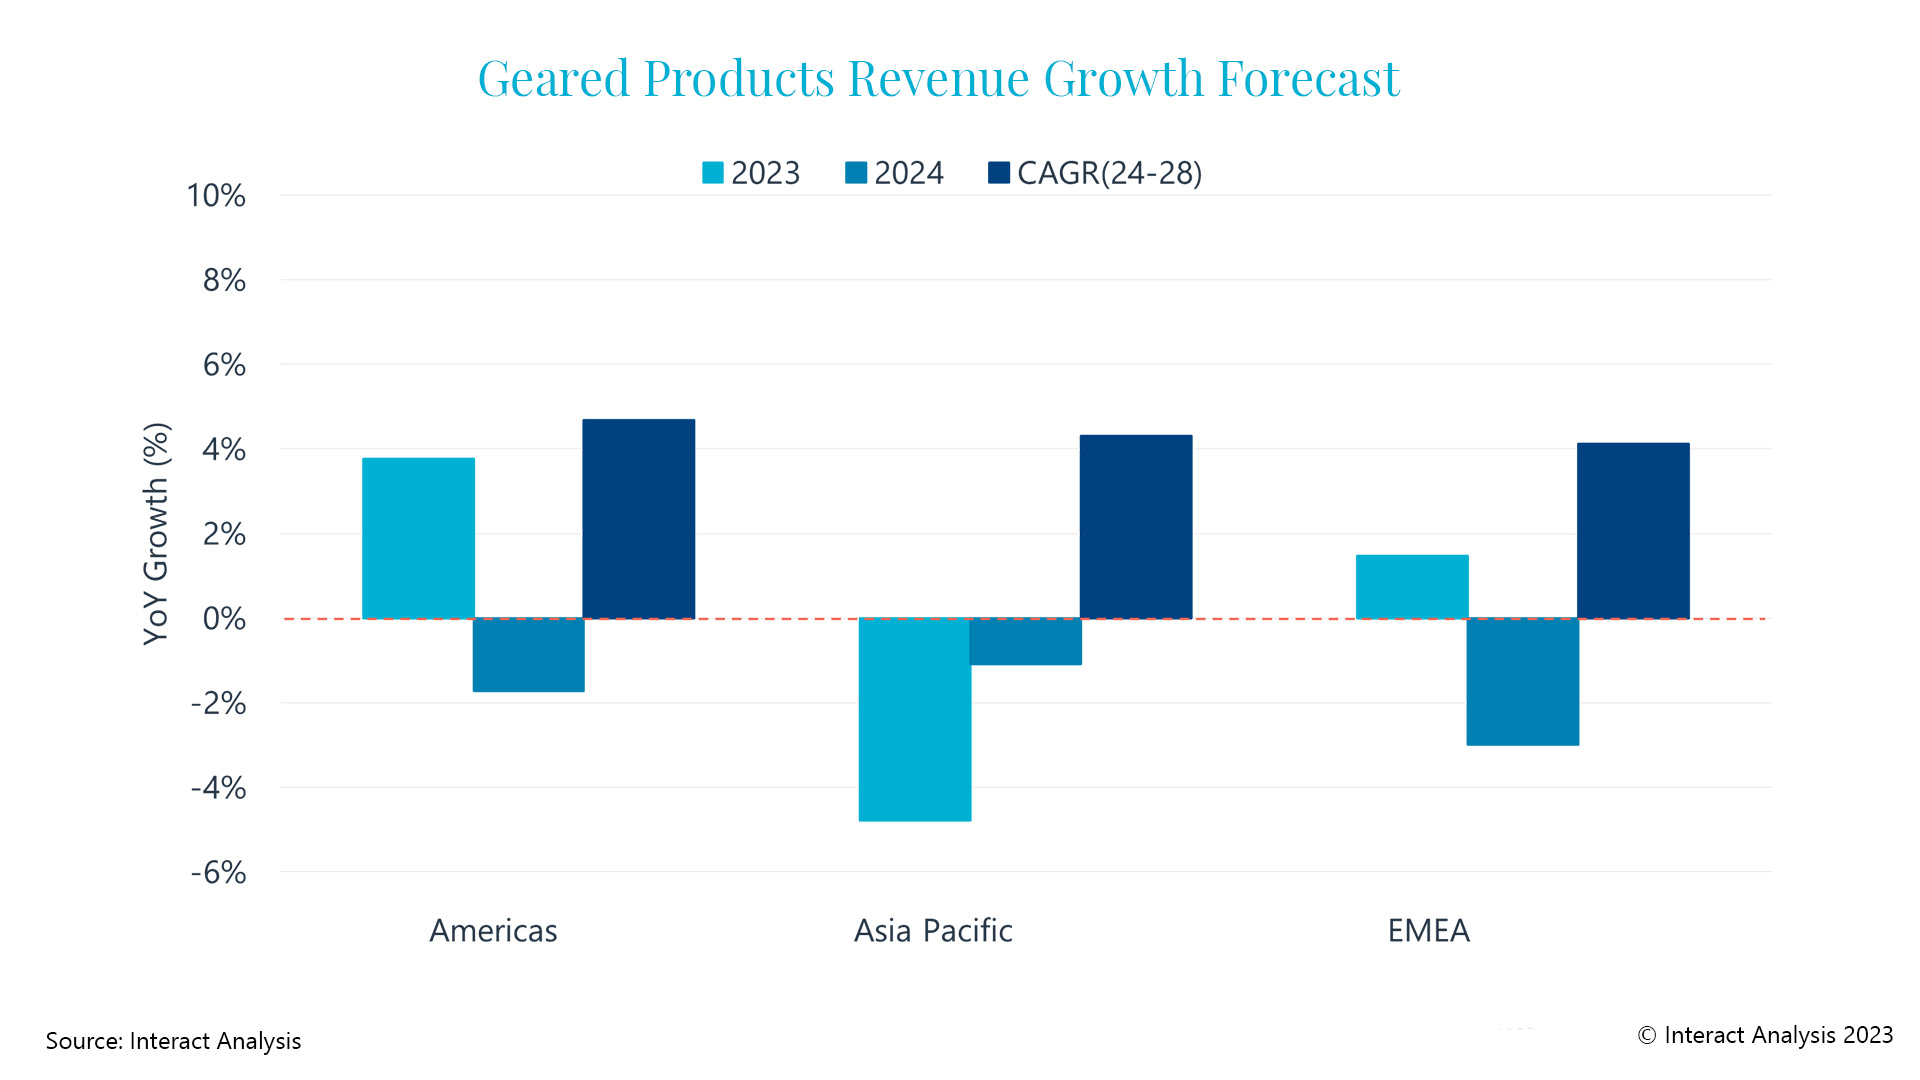 Geared products revenue growth forecast